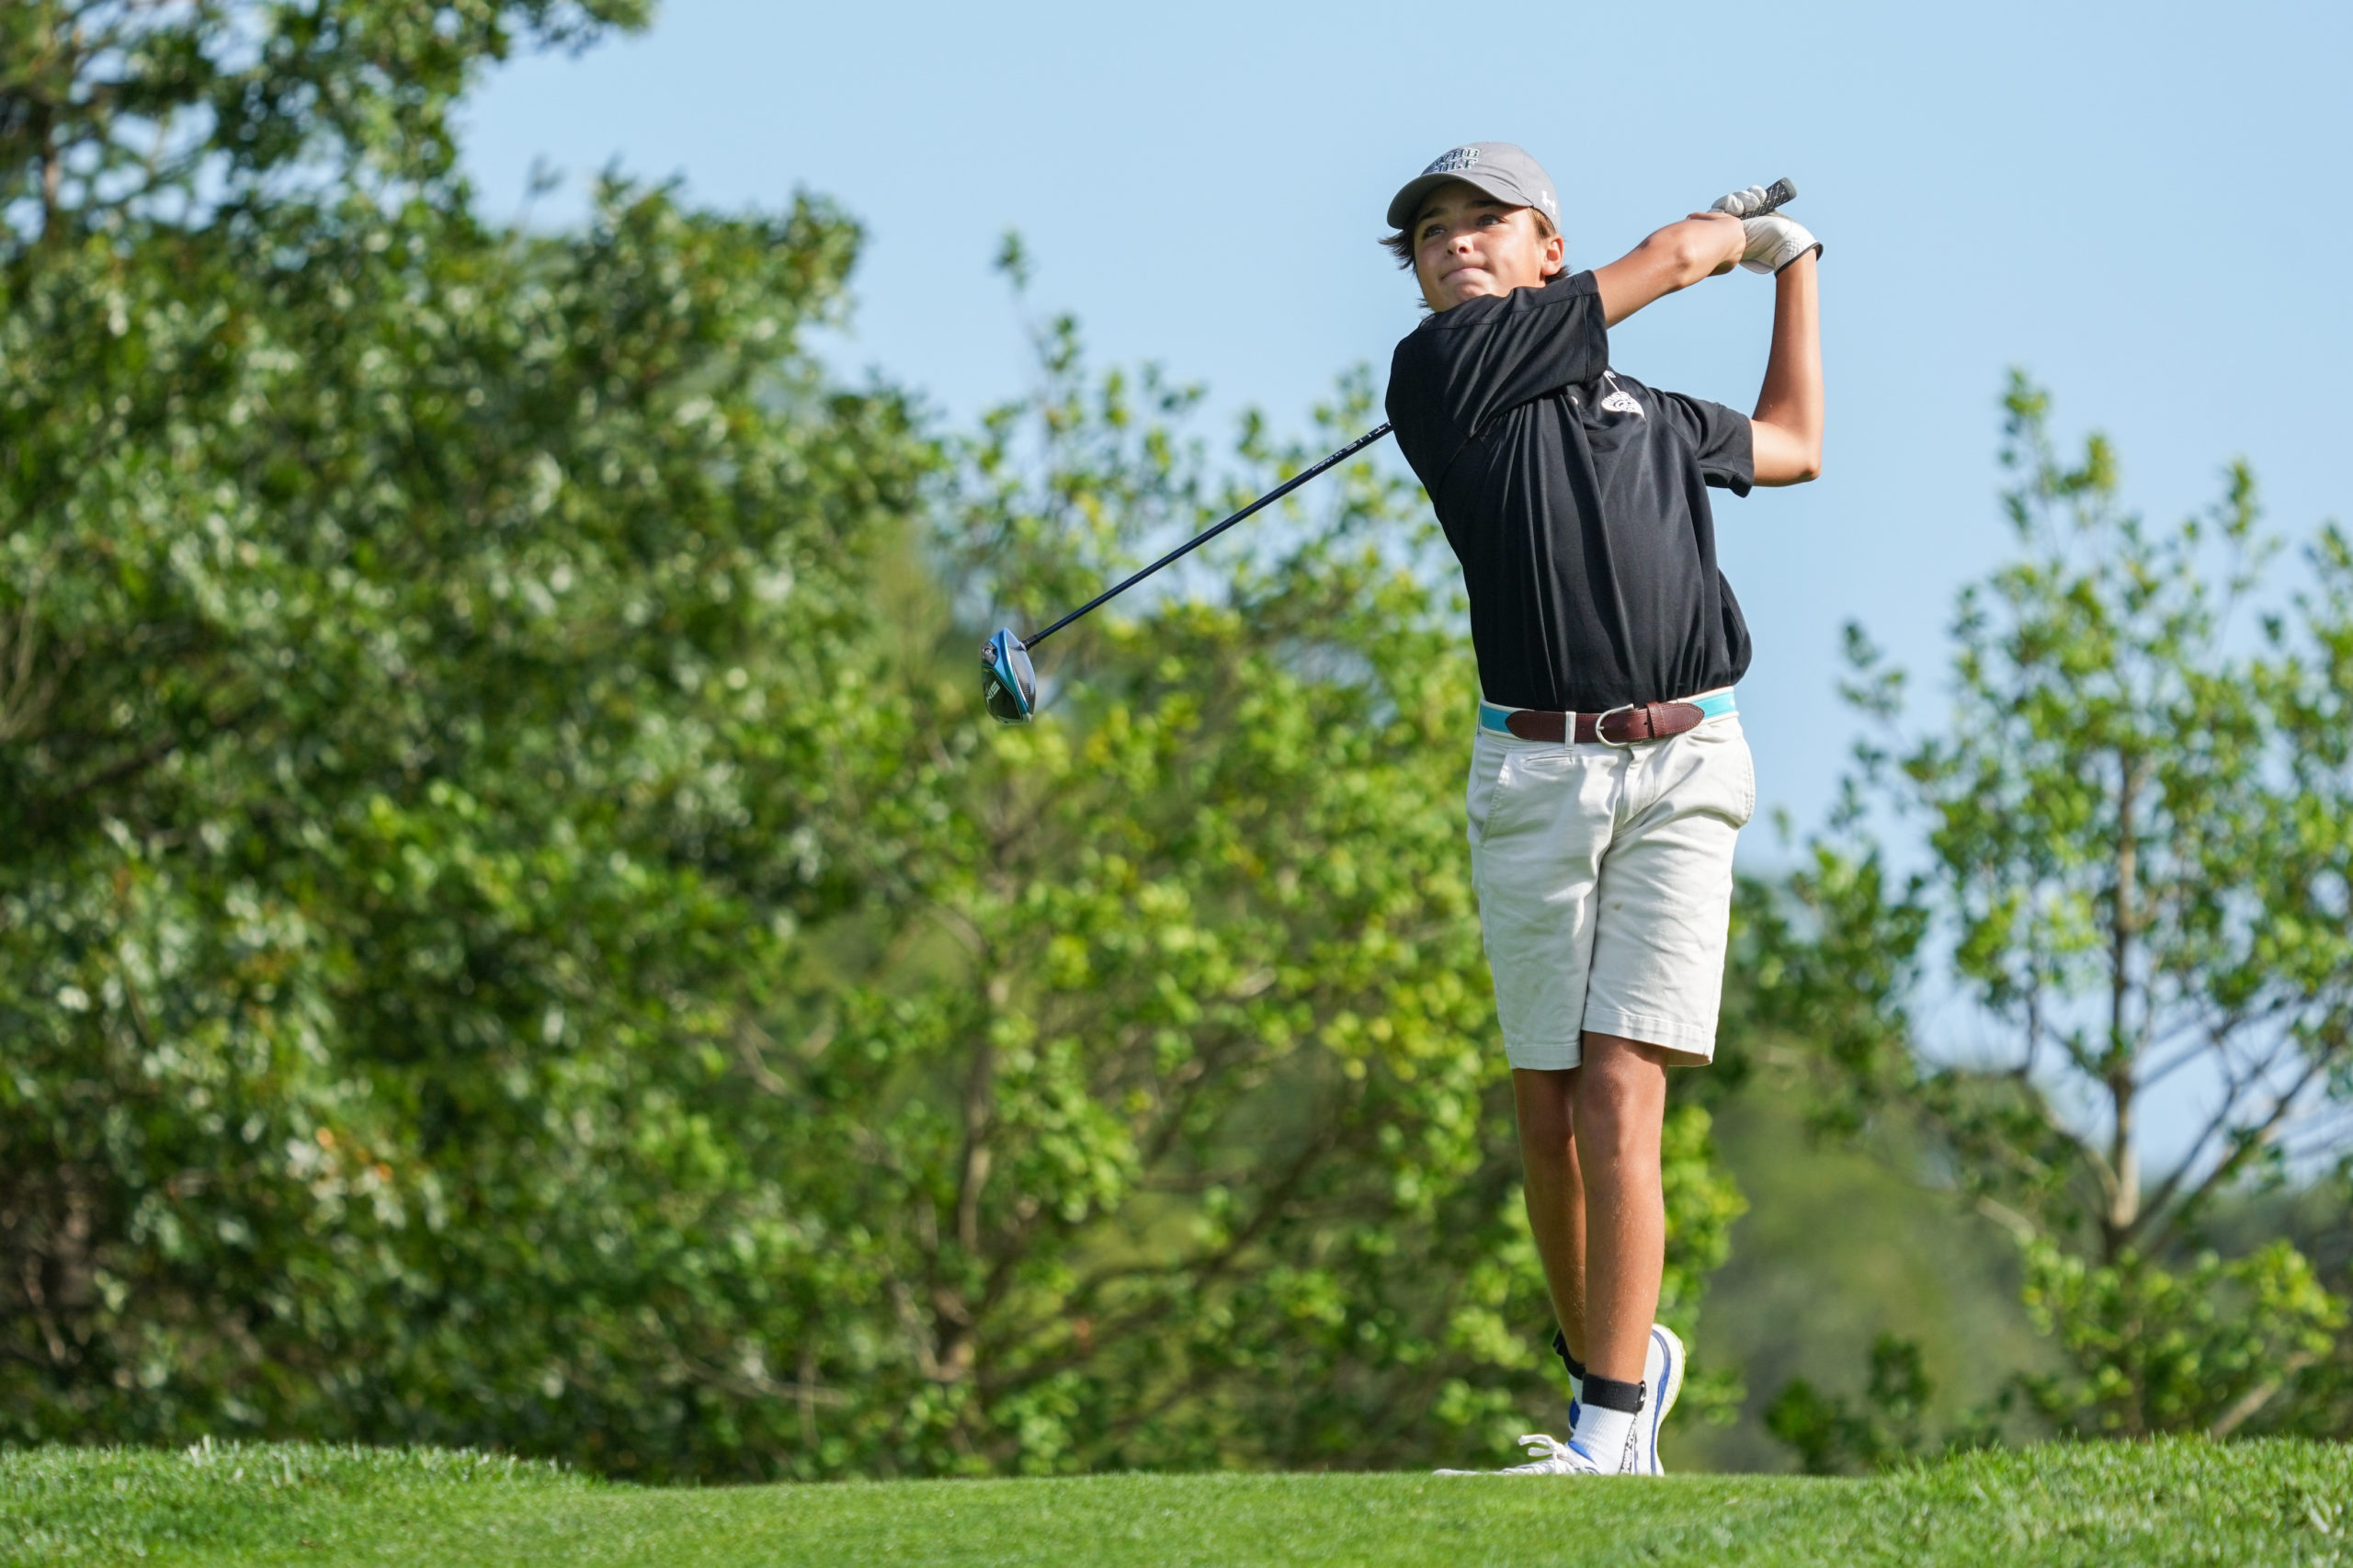 Owen Jessop was All-County and qualified for the state golf tournament.